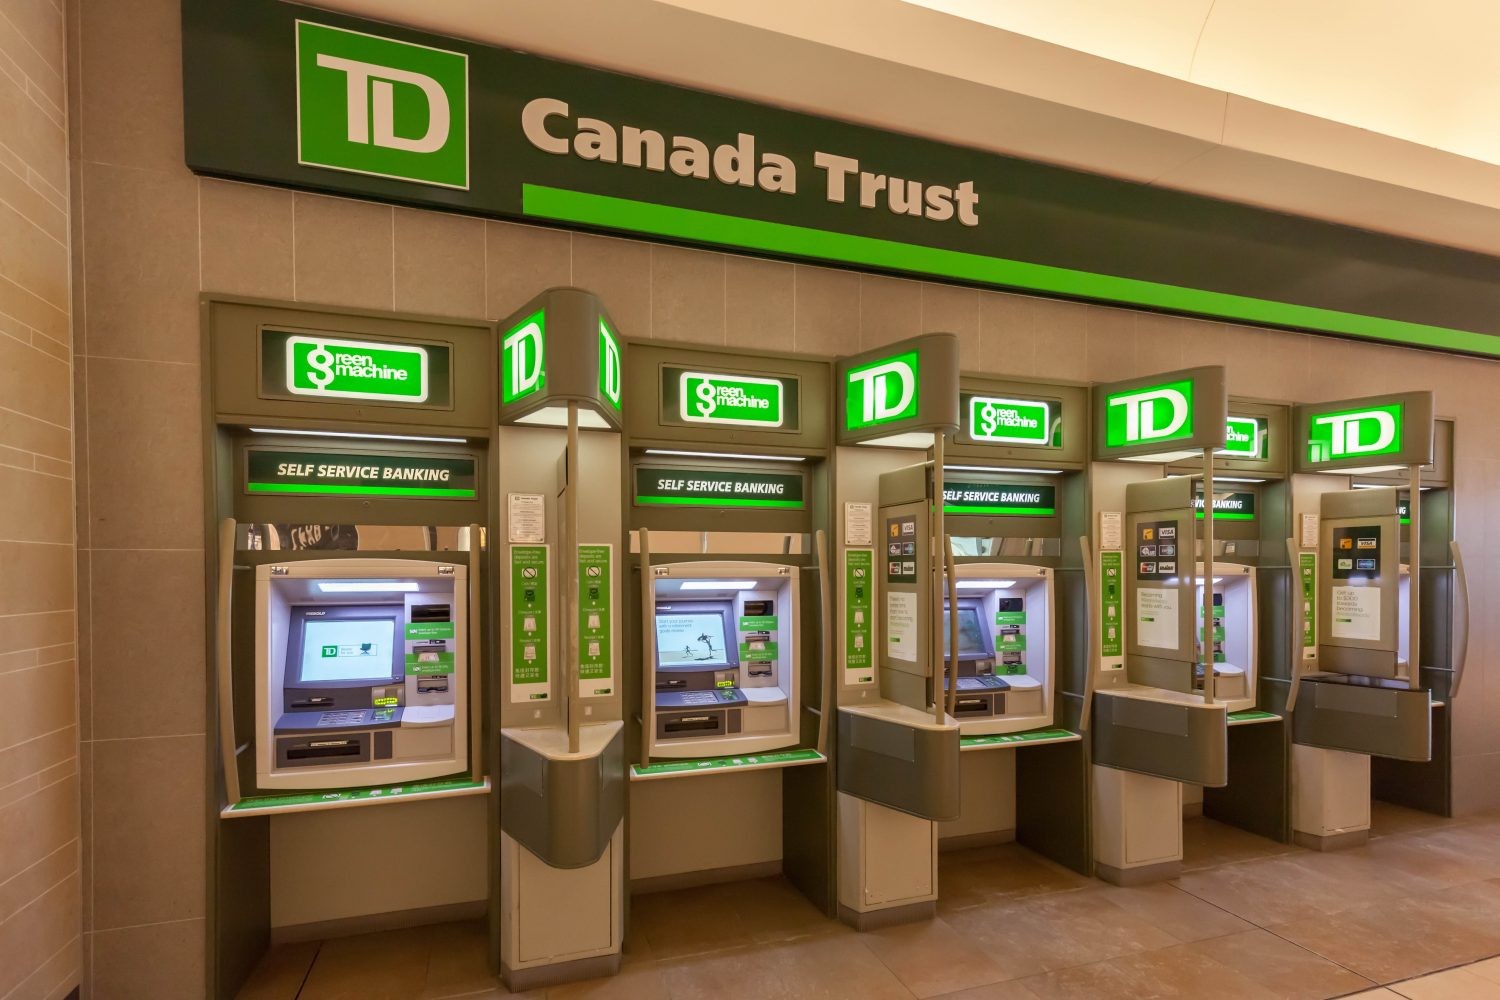 SWOT Analysis of TD Bank - TD Canada Trust, Self Service ATM